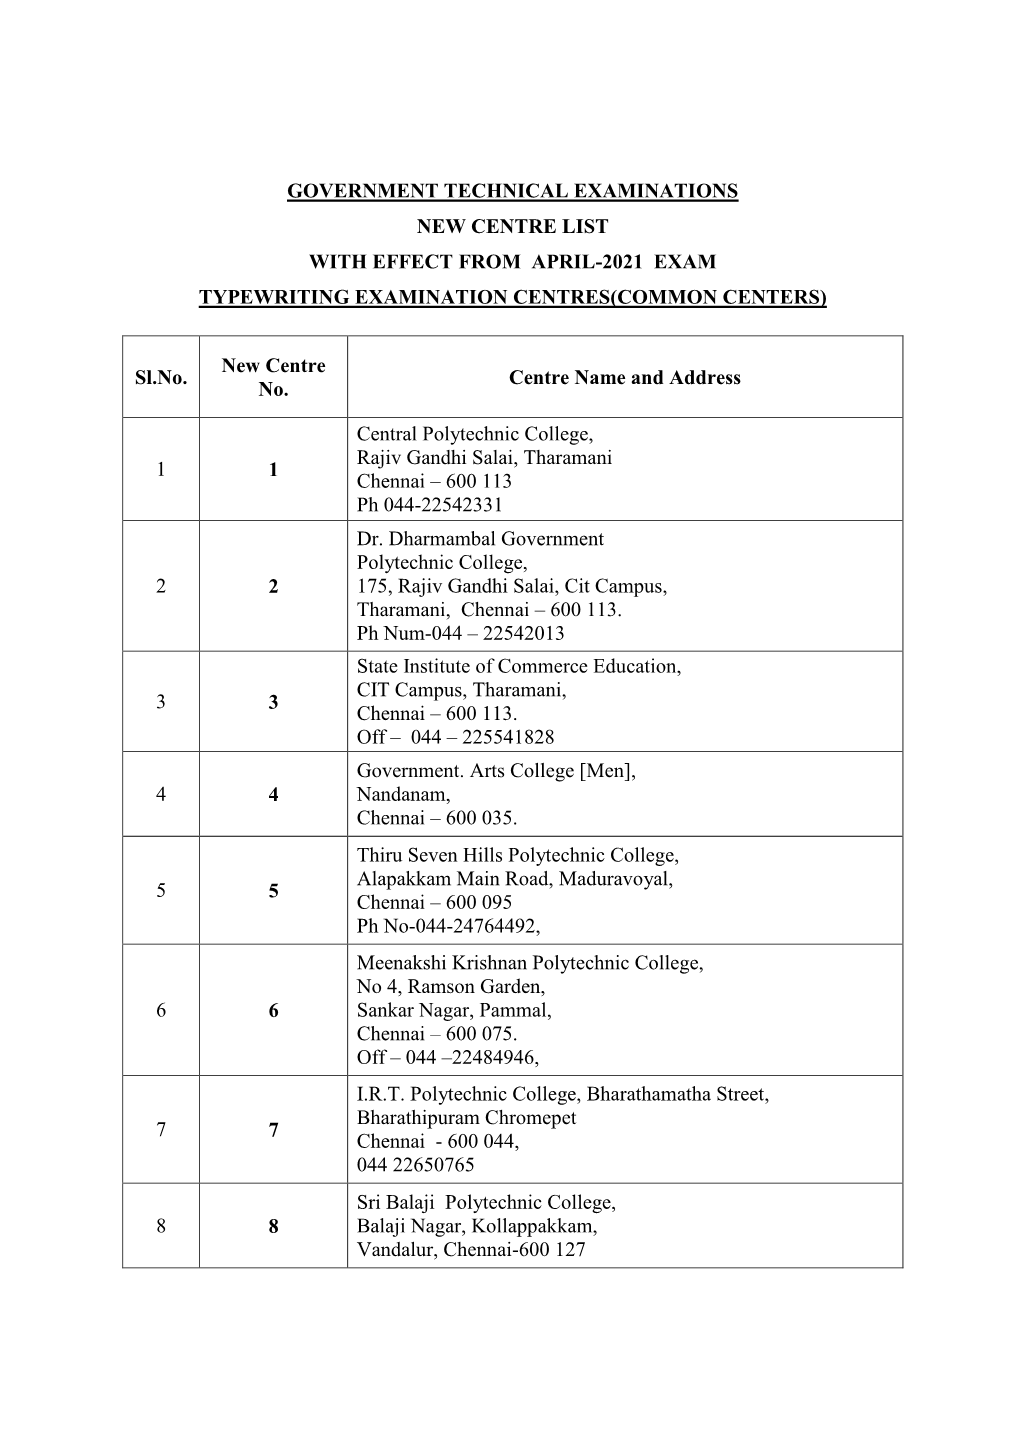 Government Technical Examinations New Centre List with Effect from April-2021 Exam Typewriting Examination Centres(Common Centers)